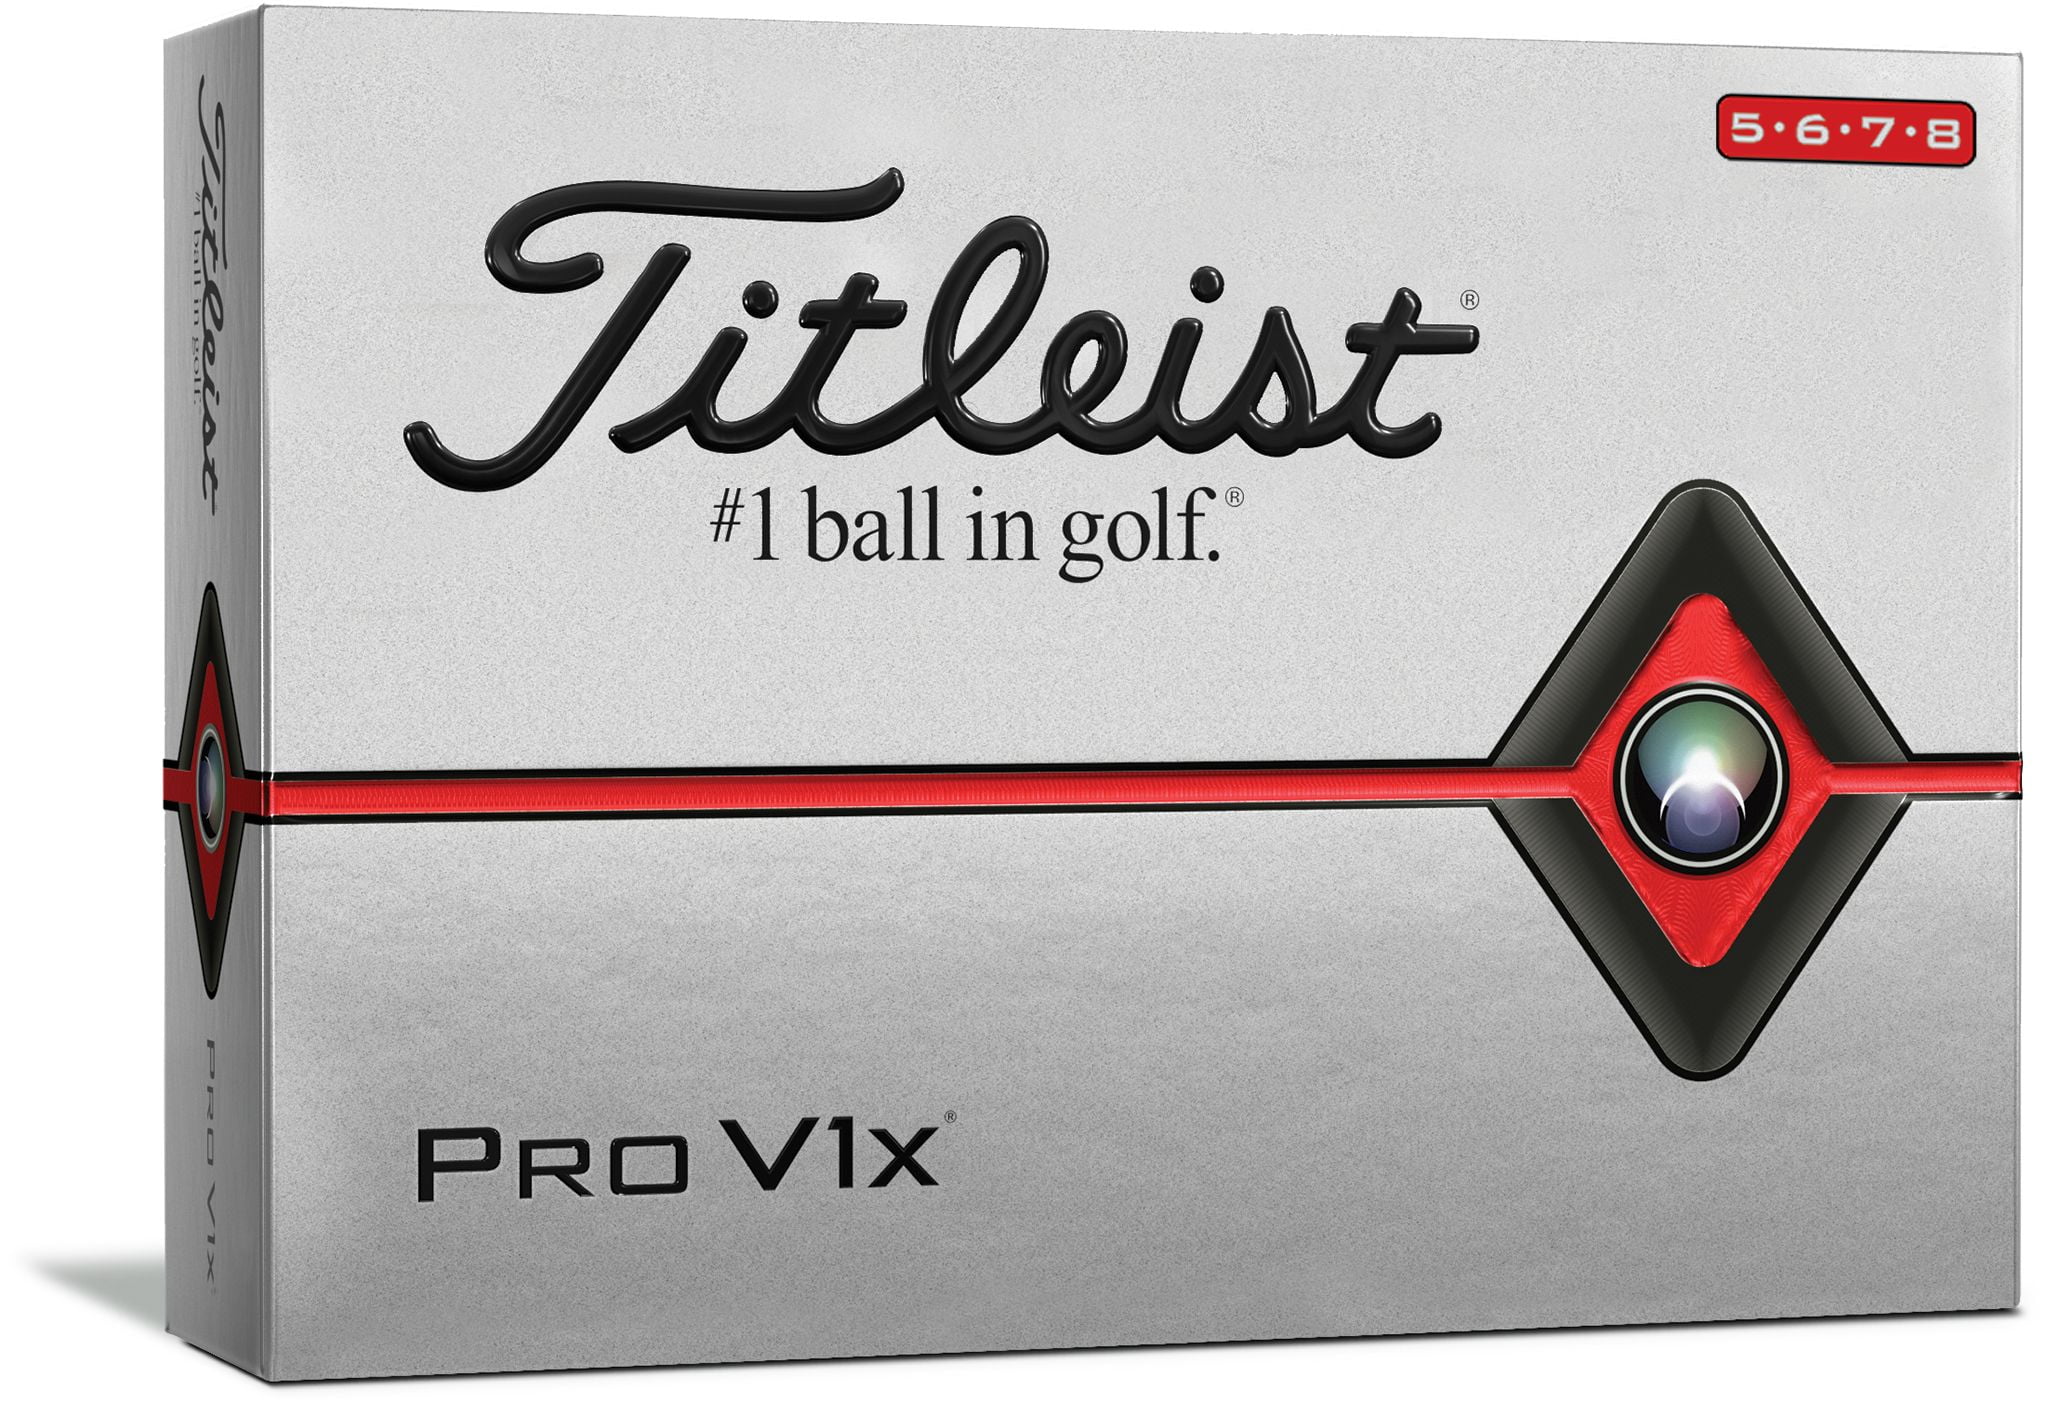 Prior Generation Titleist Pro V1x Golf Balls, High Numbers, 12 Pack ...